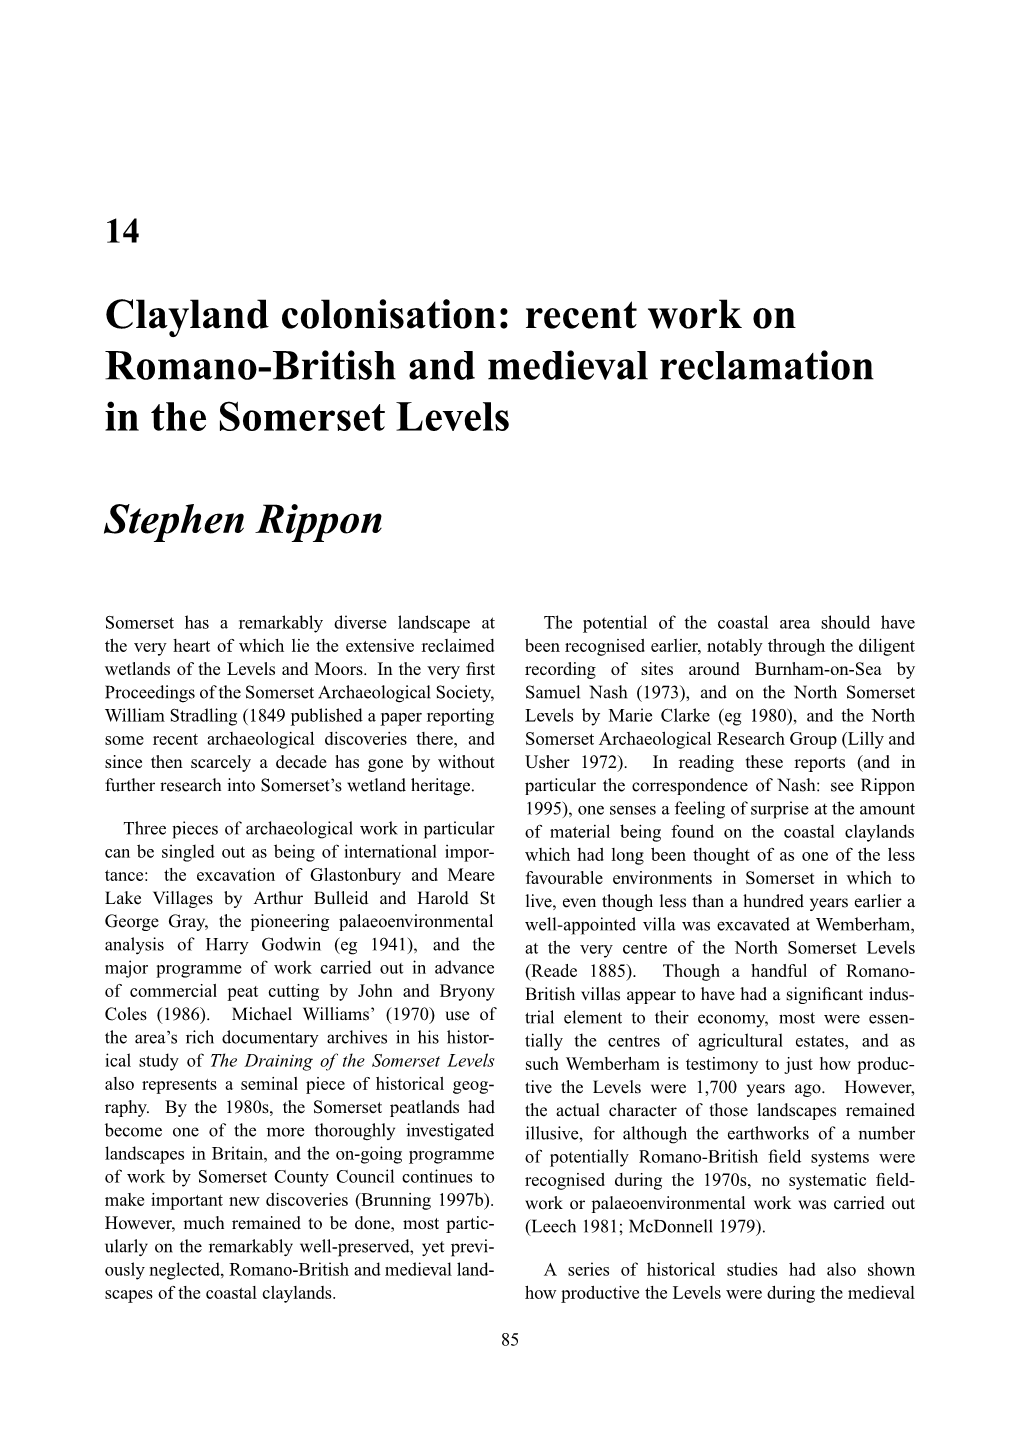 Clayland Colonisation: Recent Work on Romano-British and Medieval Reclamation in the Somerset Levels